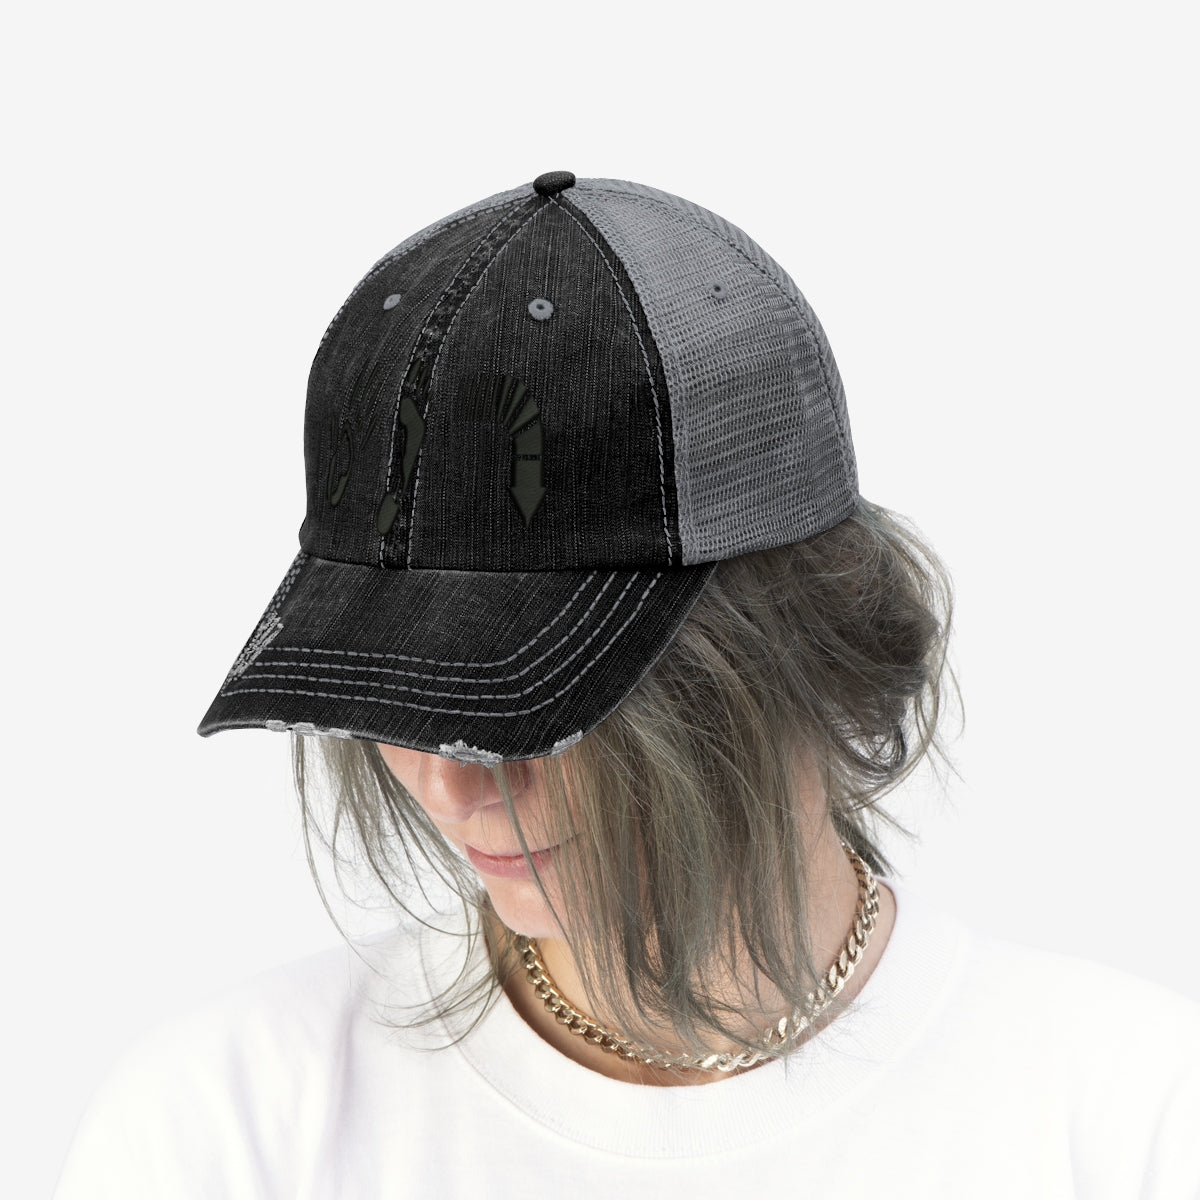 Five Toes Down Unisex Trucker Hat Embroidered